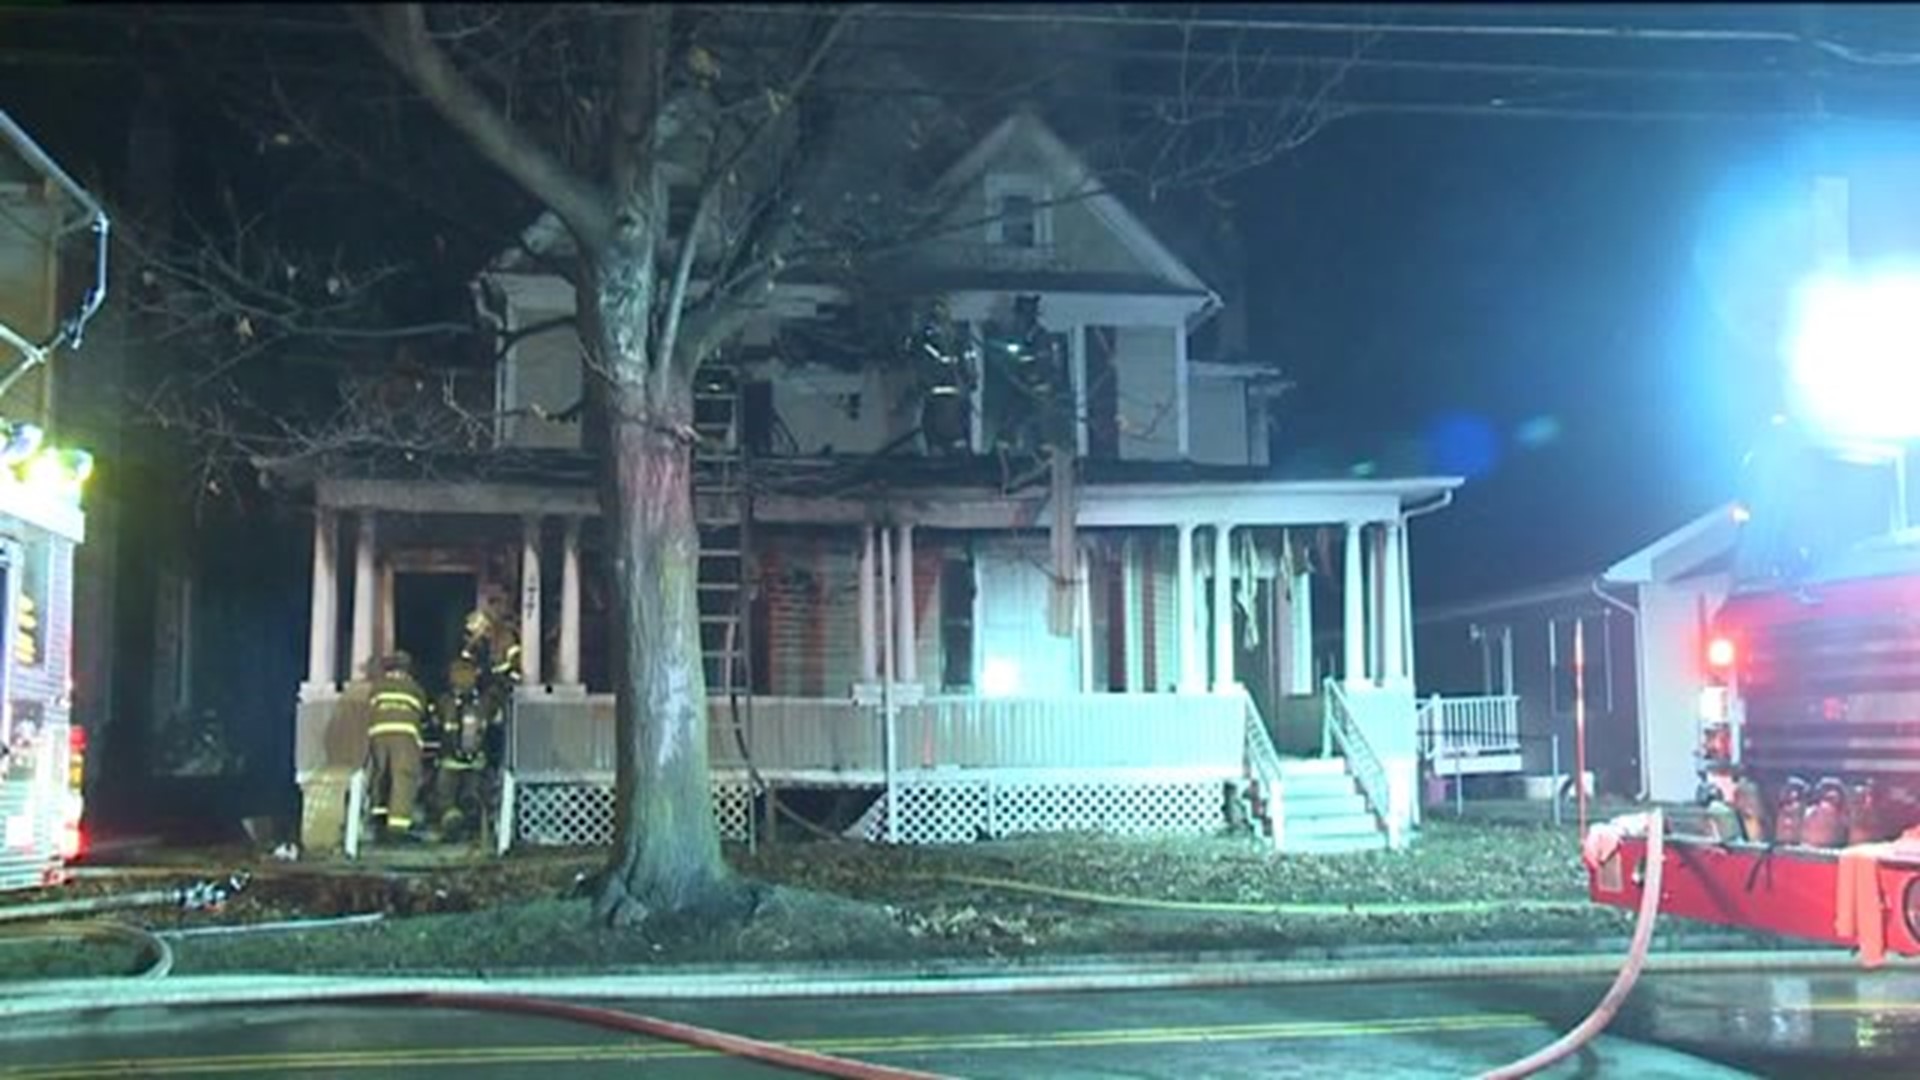 Fire Sparked in Wilkes-Barre Home